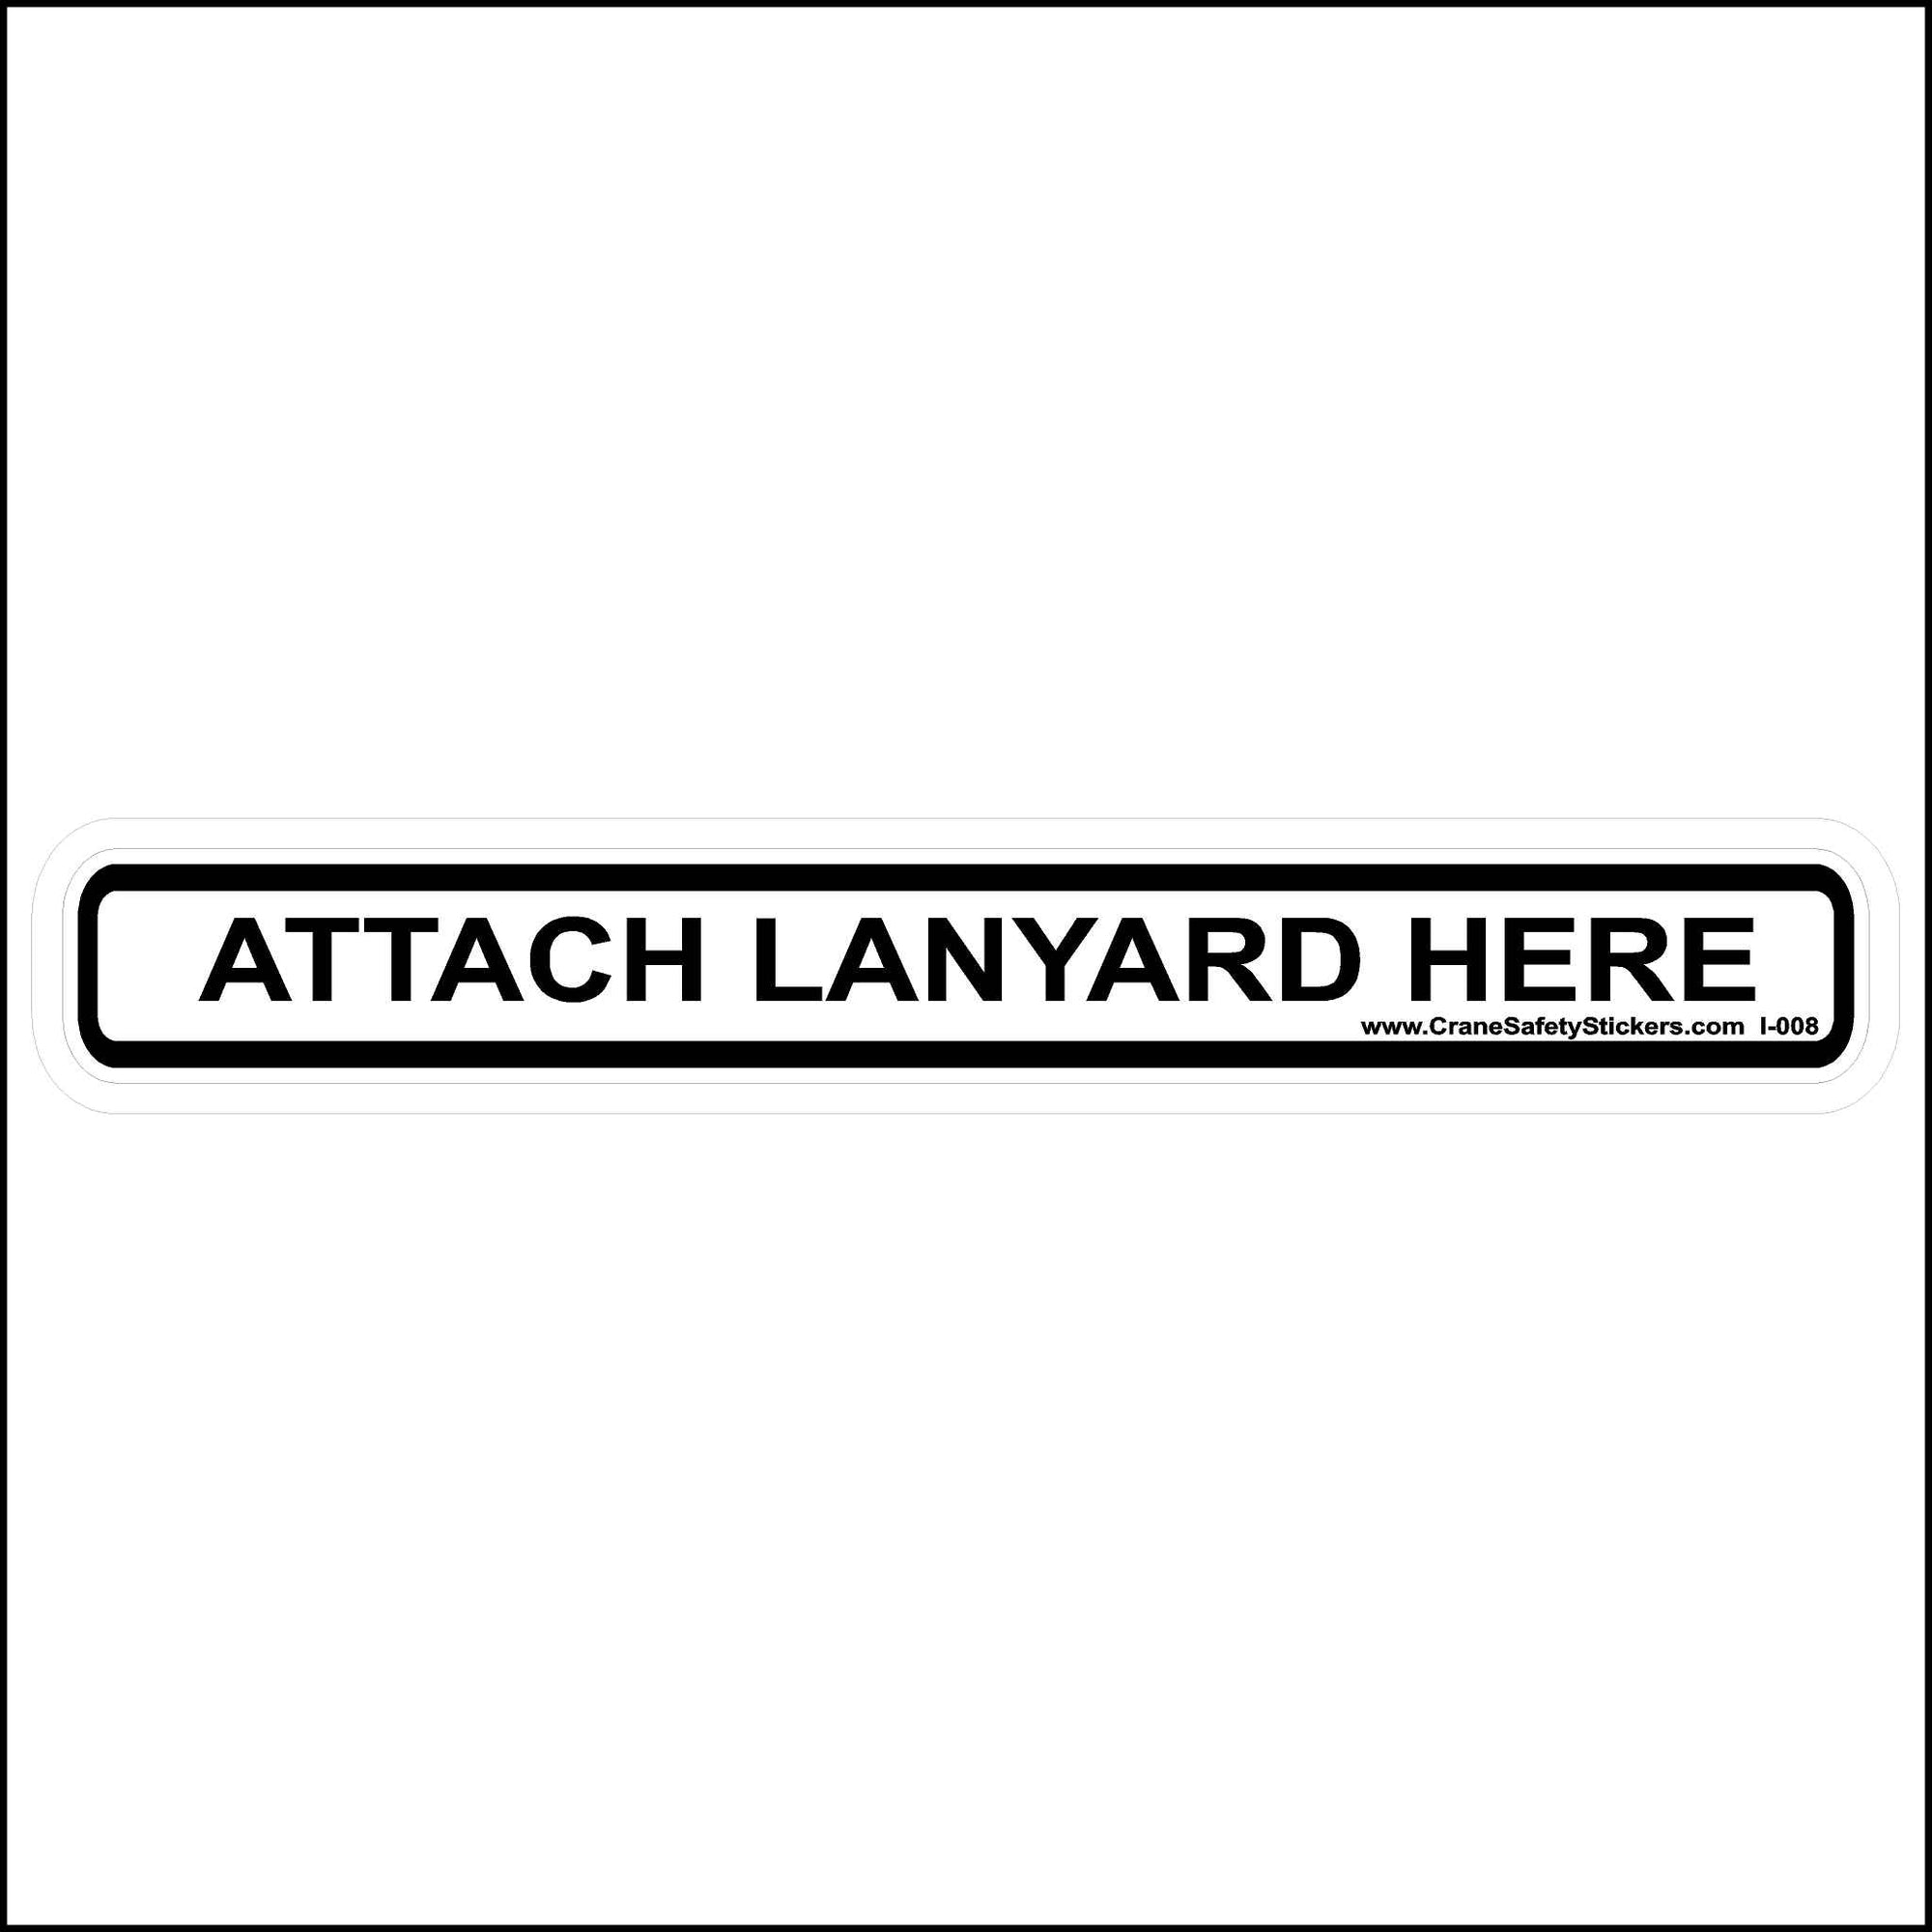 Attach Lanyard Here Sticker For Bucket Trucks. The Words Attach Lanyard Here are in black on a white background.